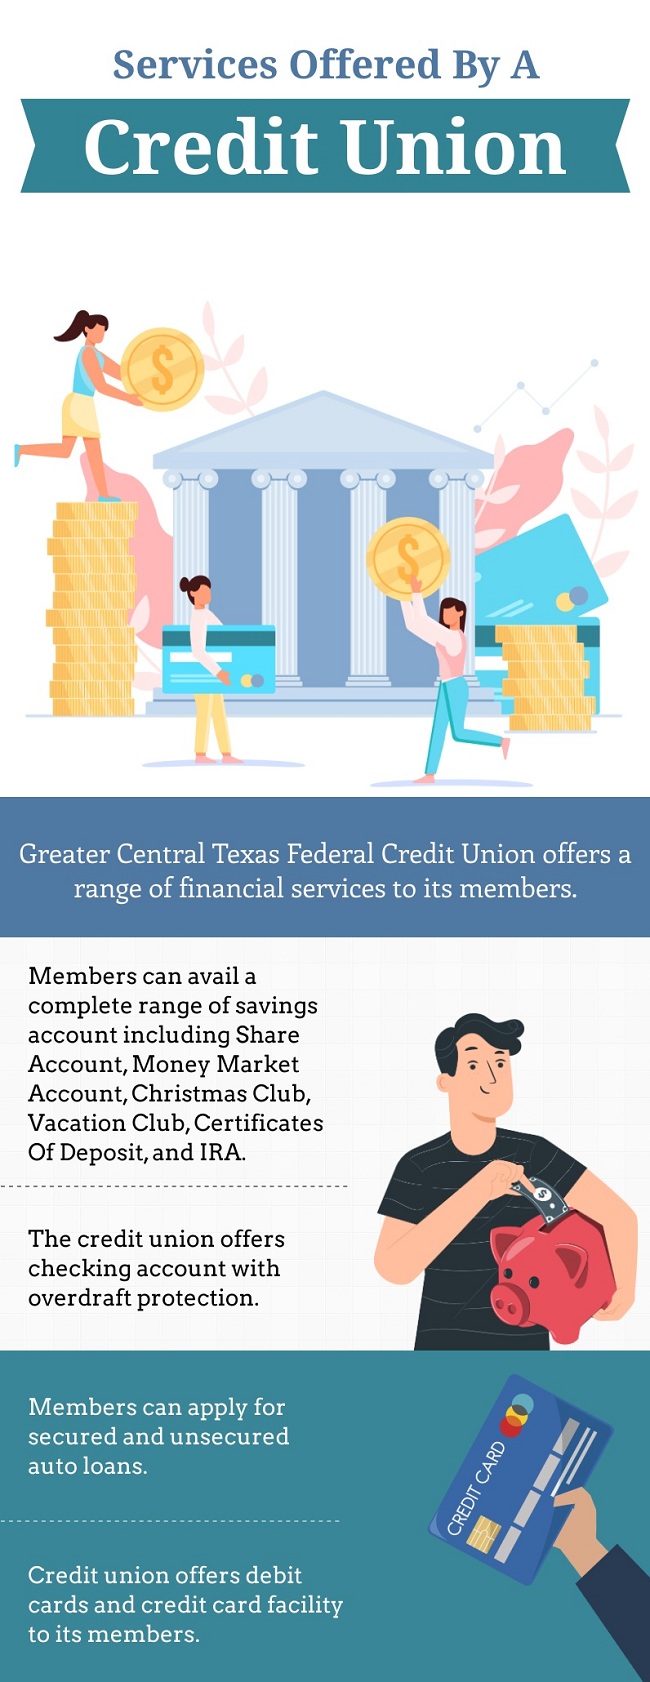 GCTFCU Blog | All posts tagged 'Credit Union in Killeen TX'